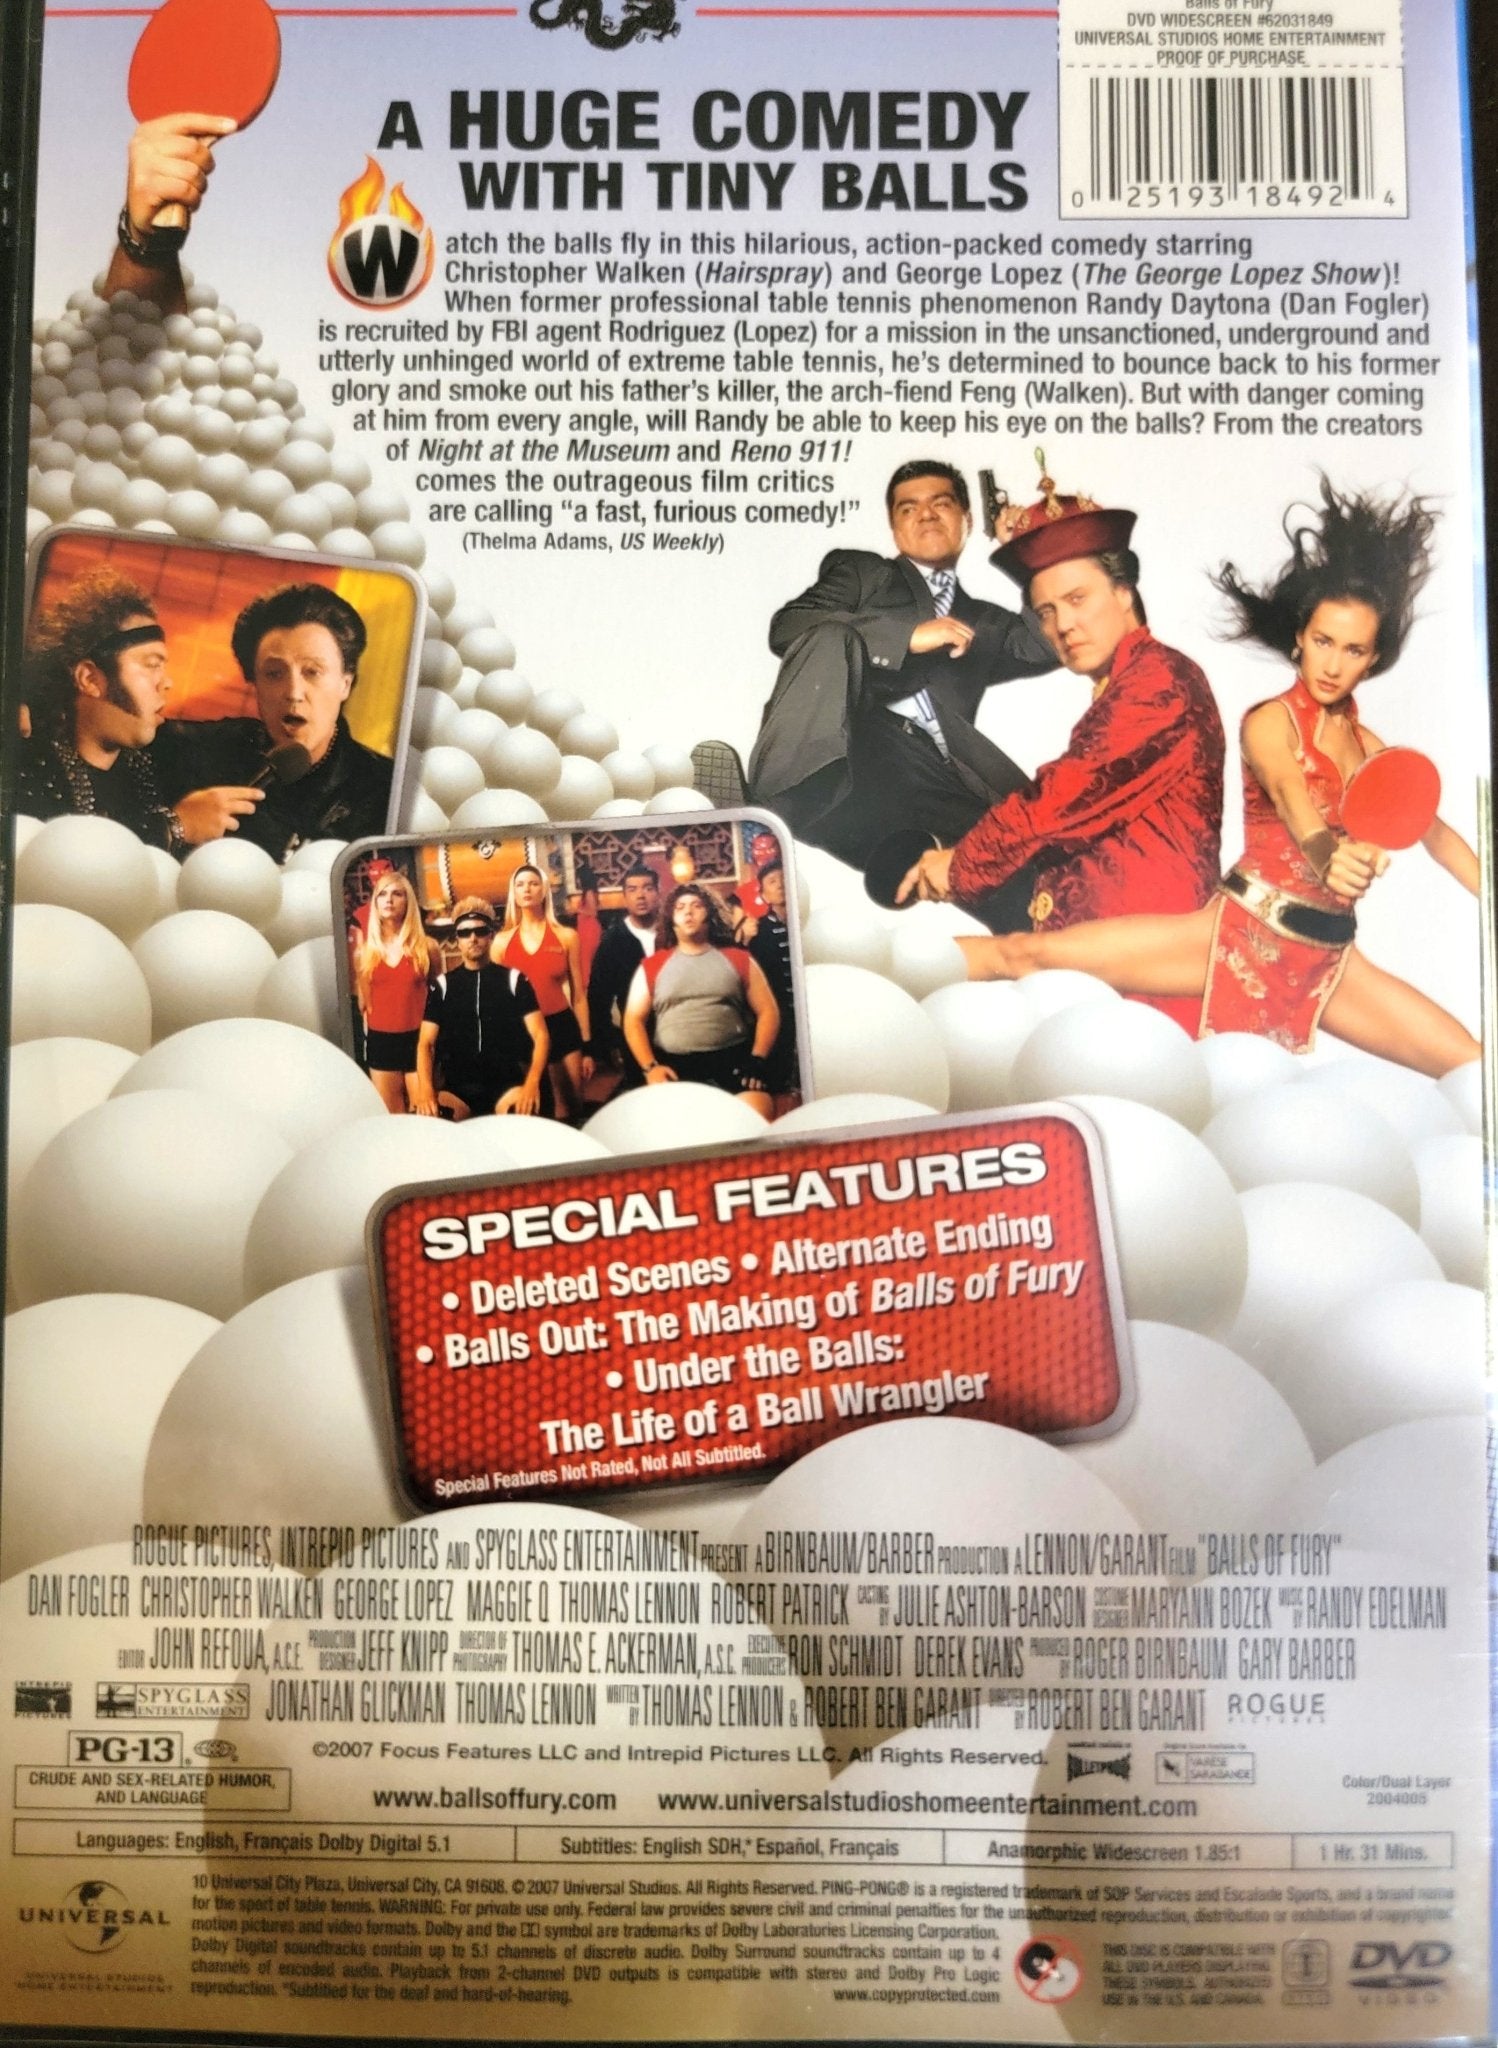 Rogue Pictures - Balls of Fury | DVD | Widescreen - DVD - Steady Bunny Shop